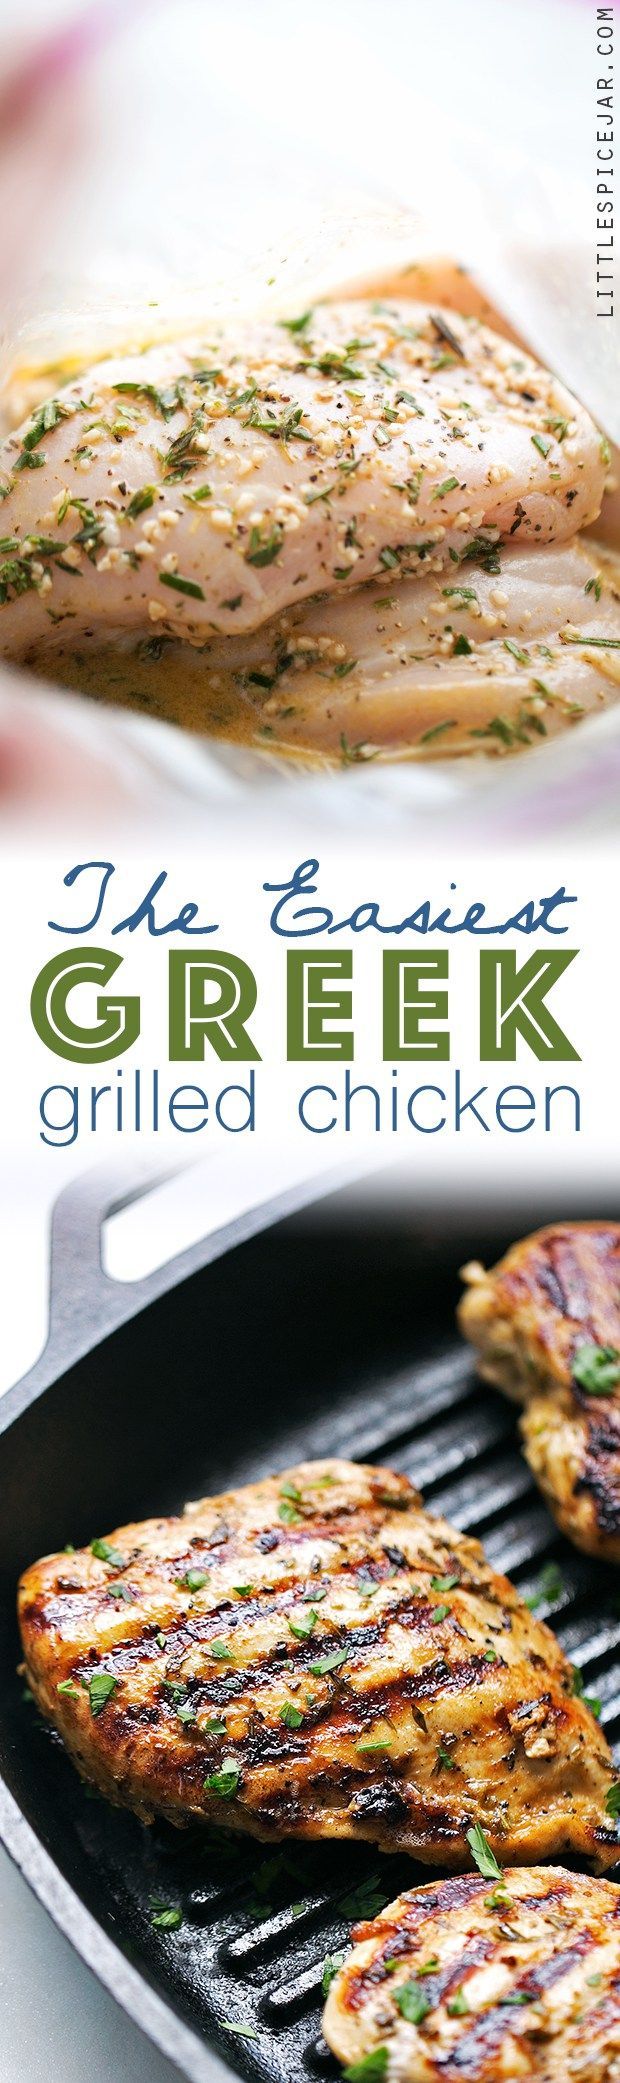 The Easiest Greek Grilled Chicken